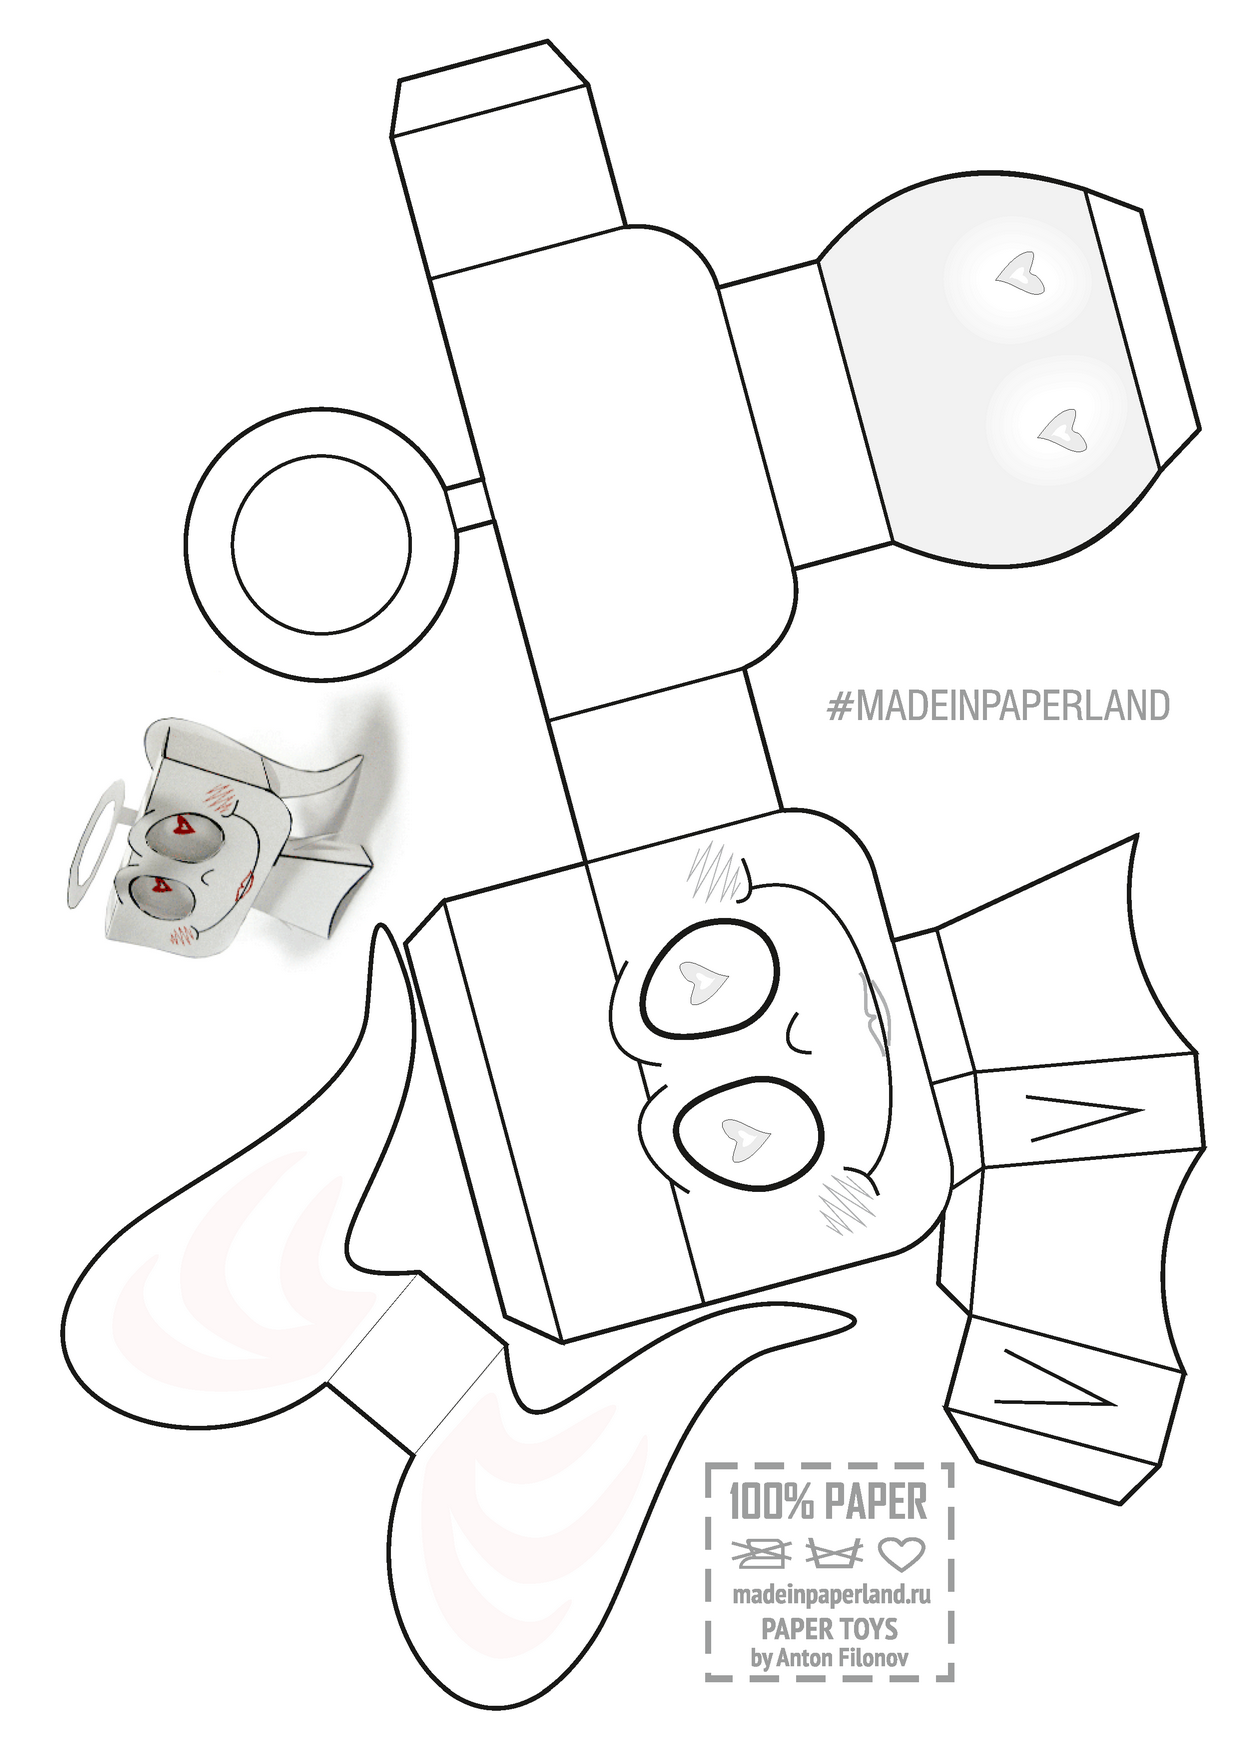 Five nights at Freddy's Toys  Free Printable Papercraft Templates